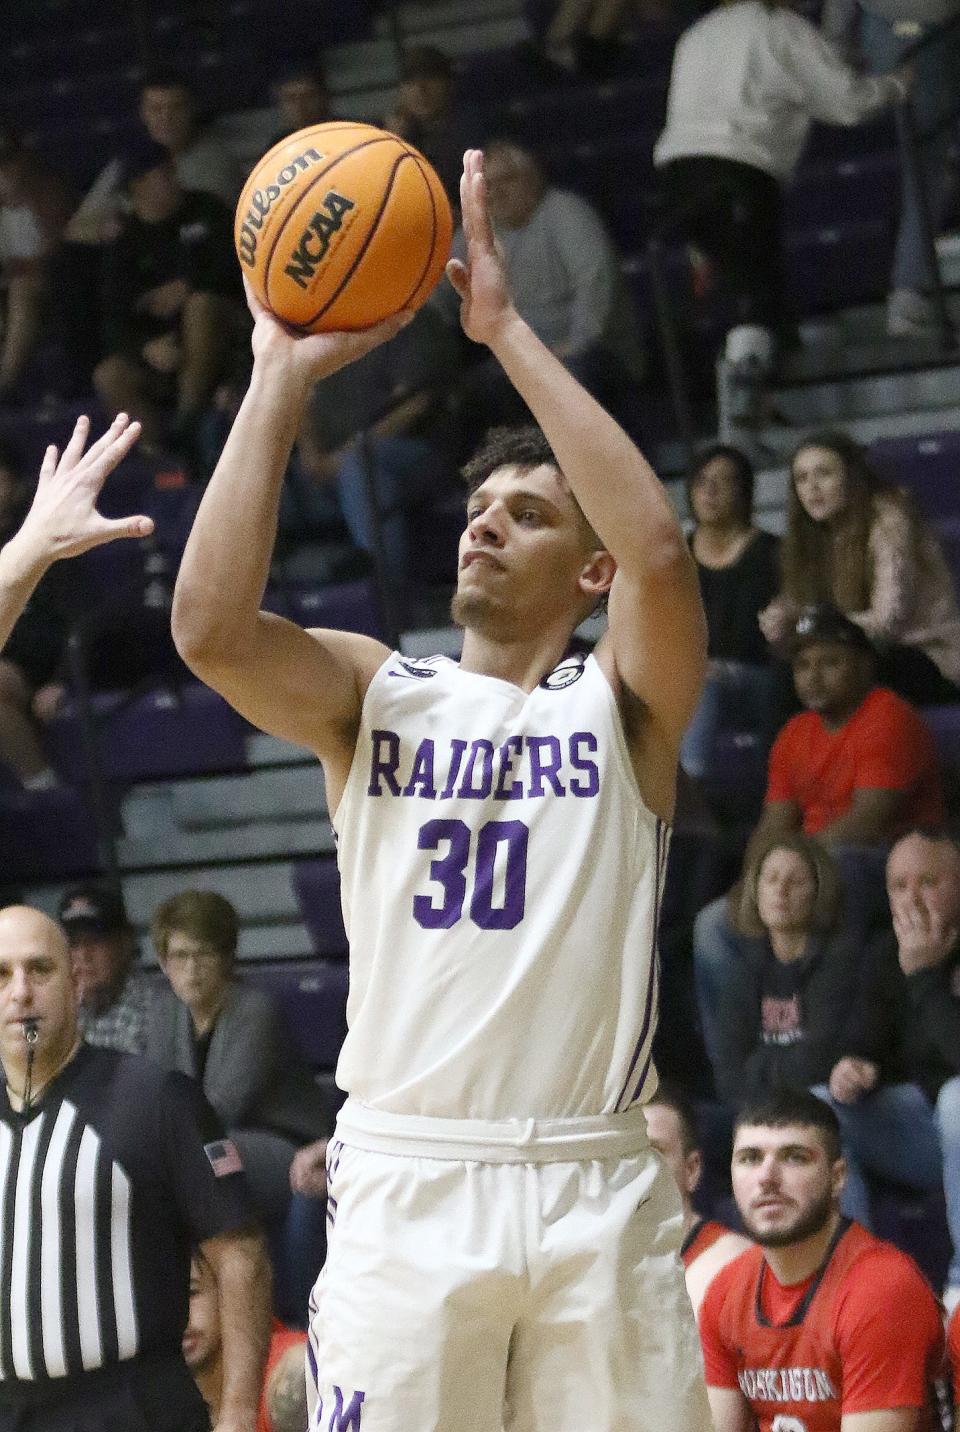 Mount Union's Braedon Poole puts up a 3-point shot, Wednesday, Feb. 15, 2023.